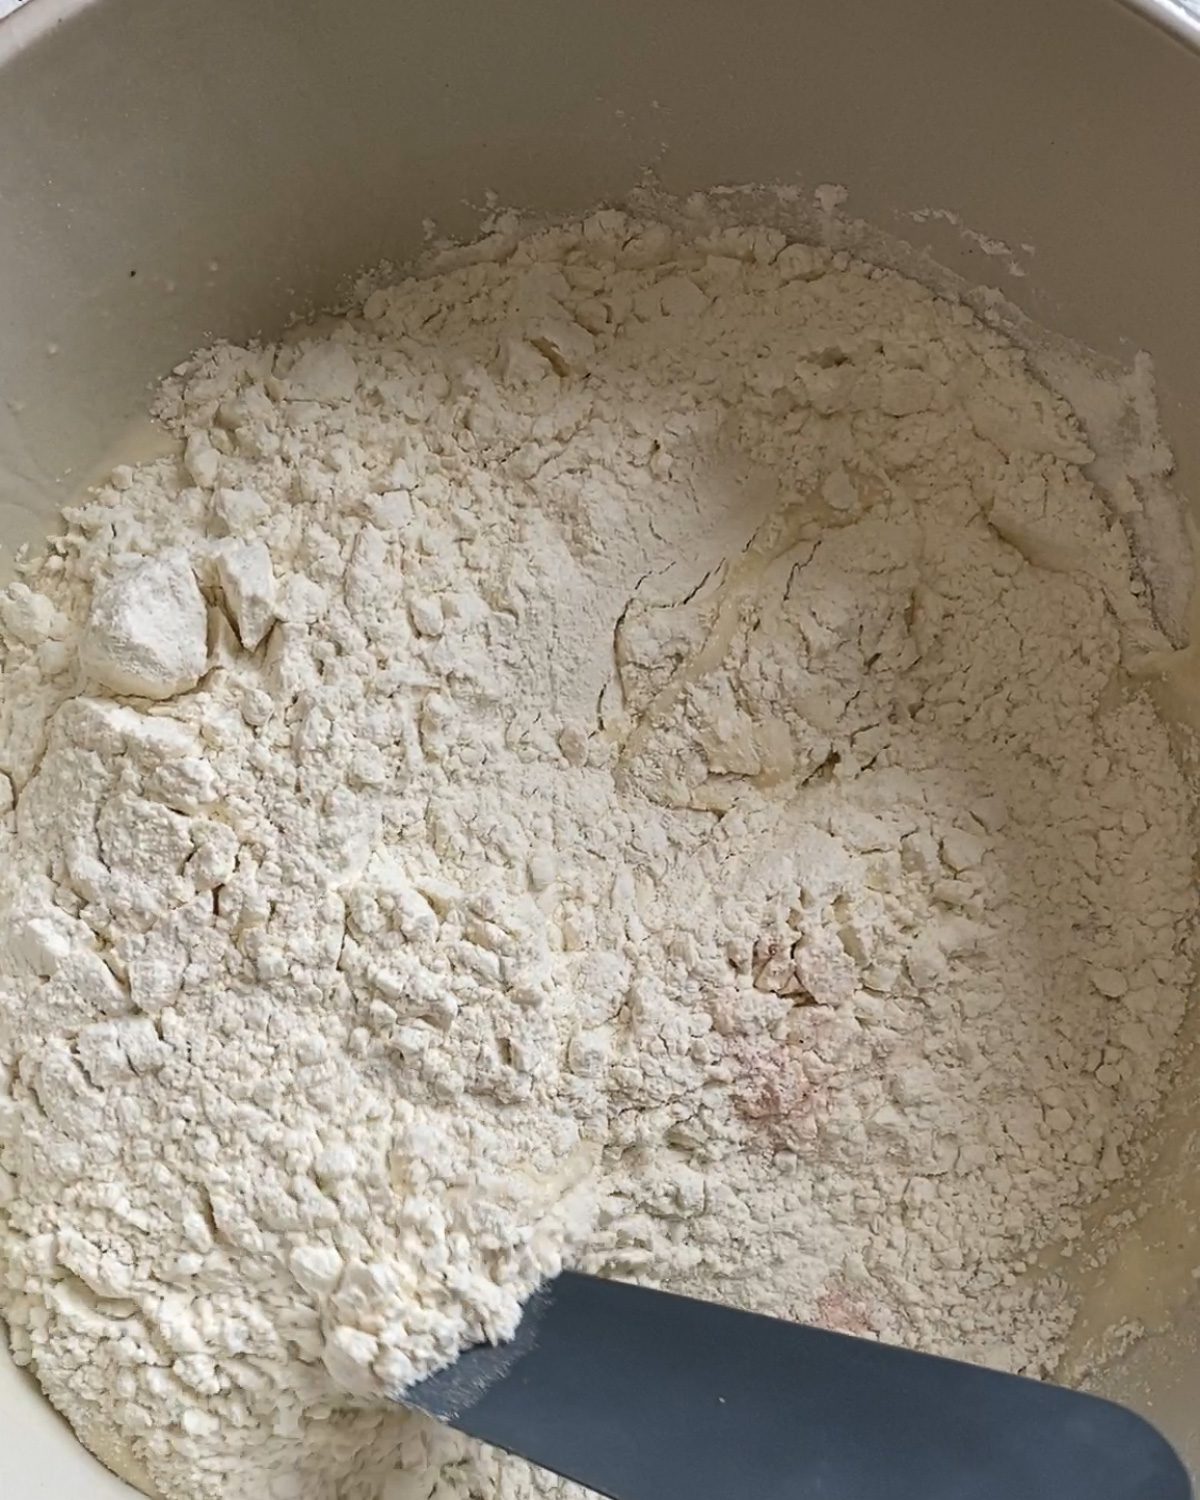 process of mixing flour and herb ingredients together in white bowl